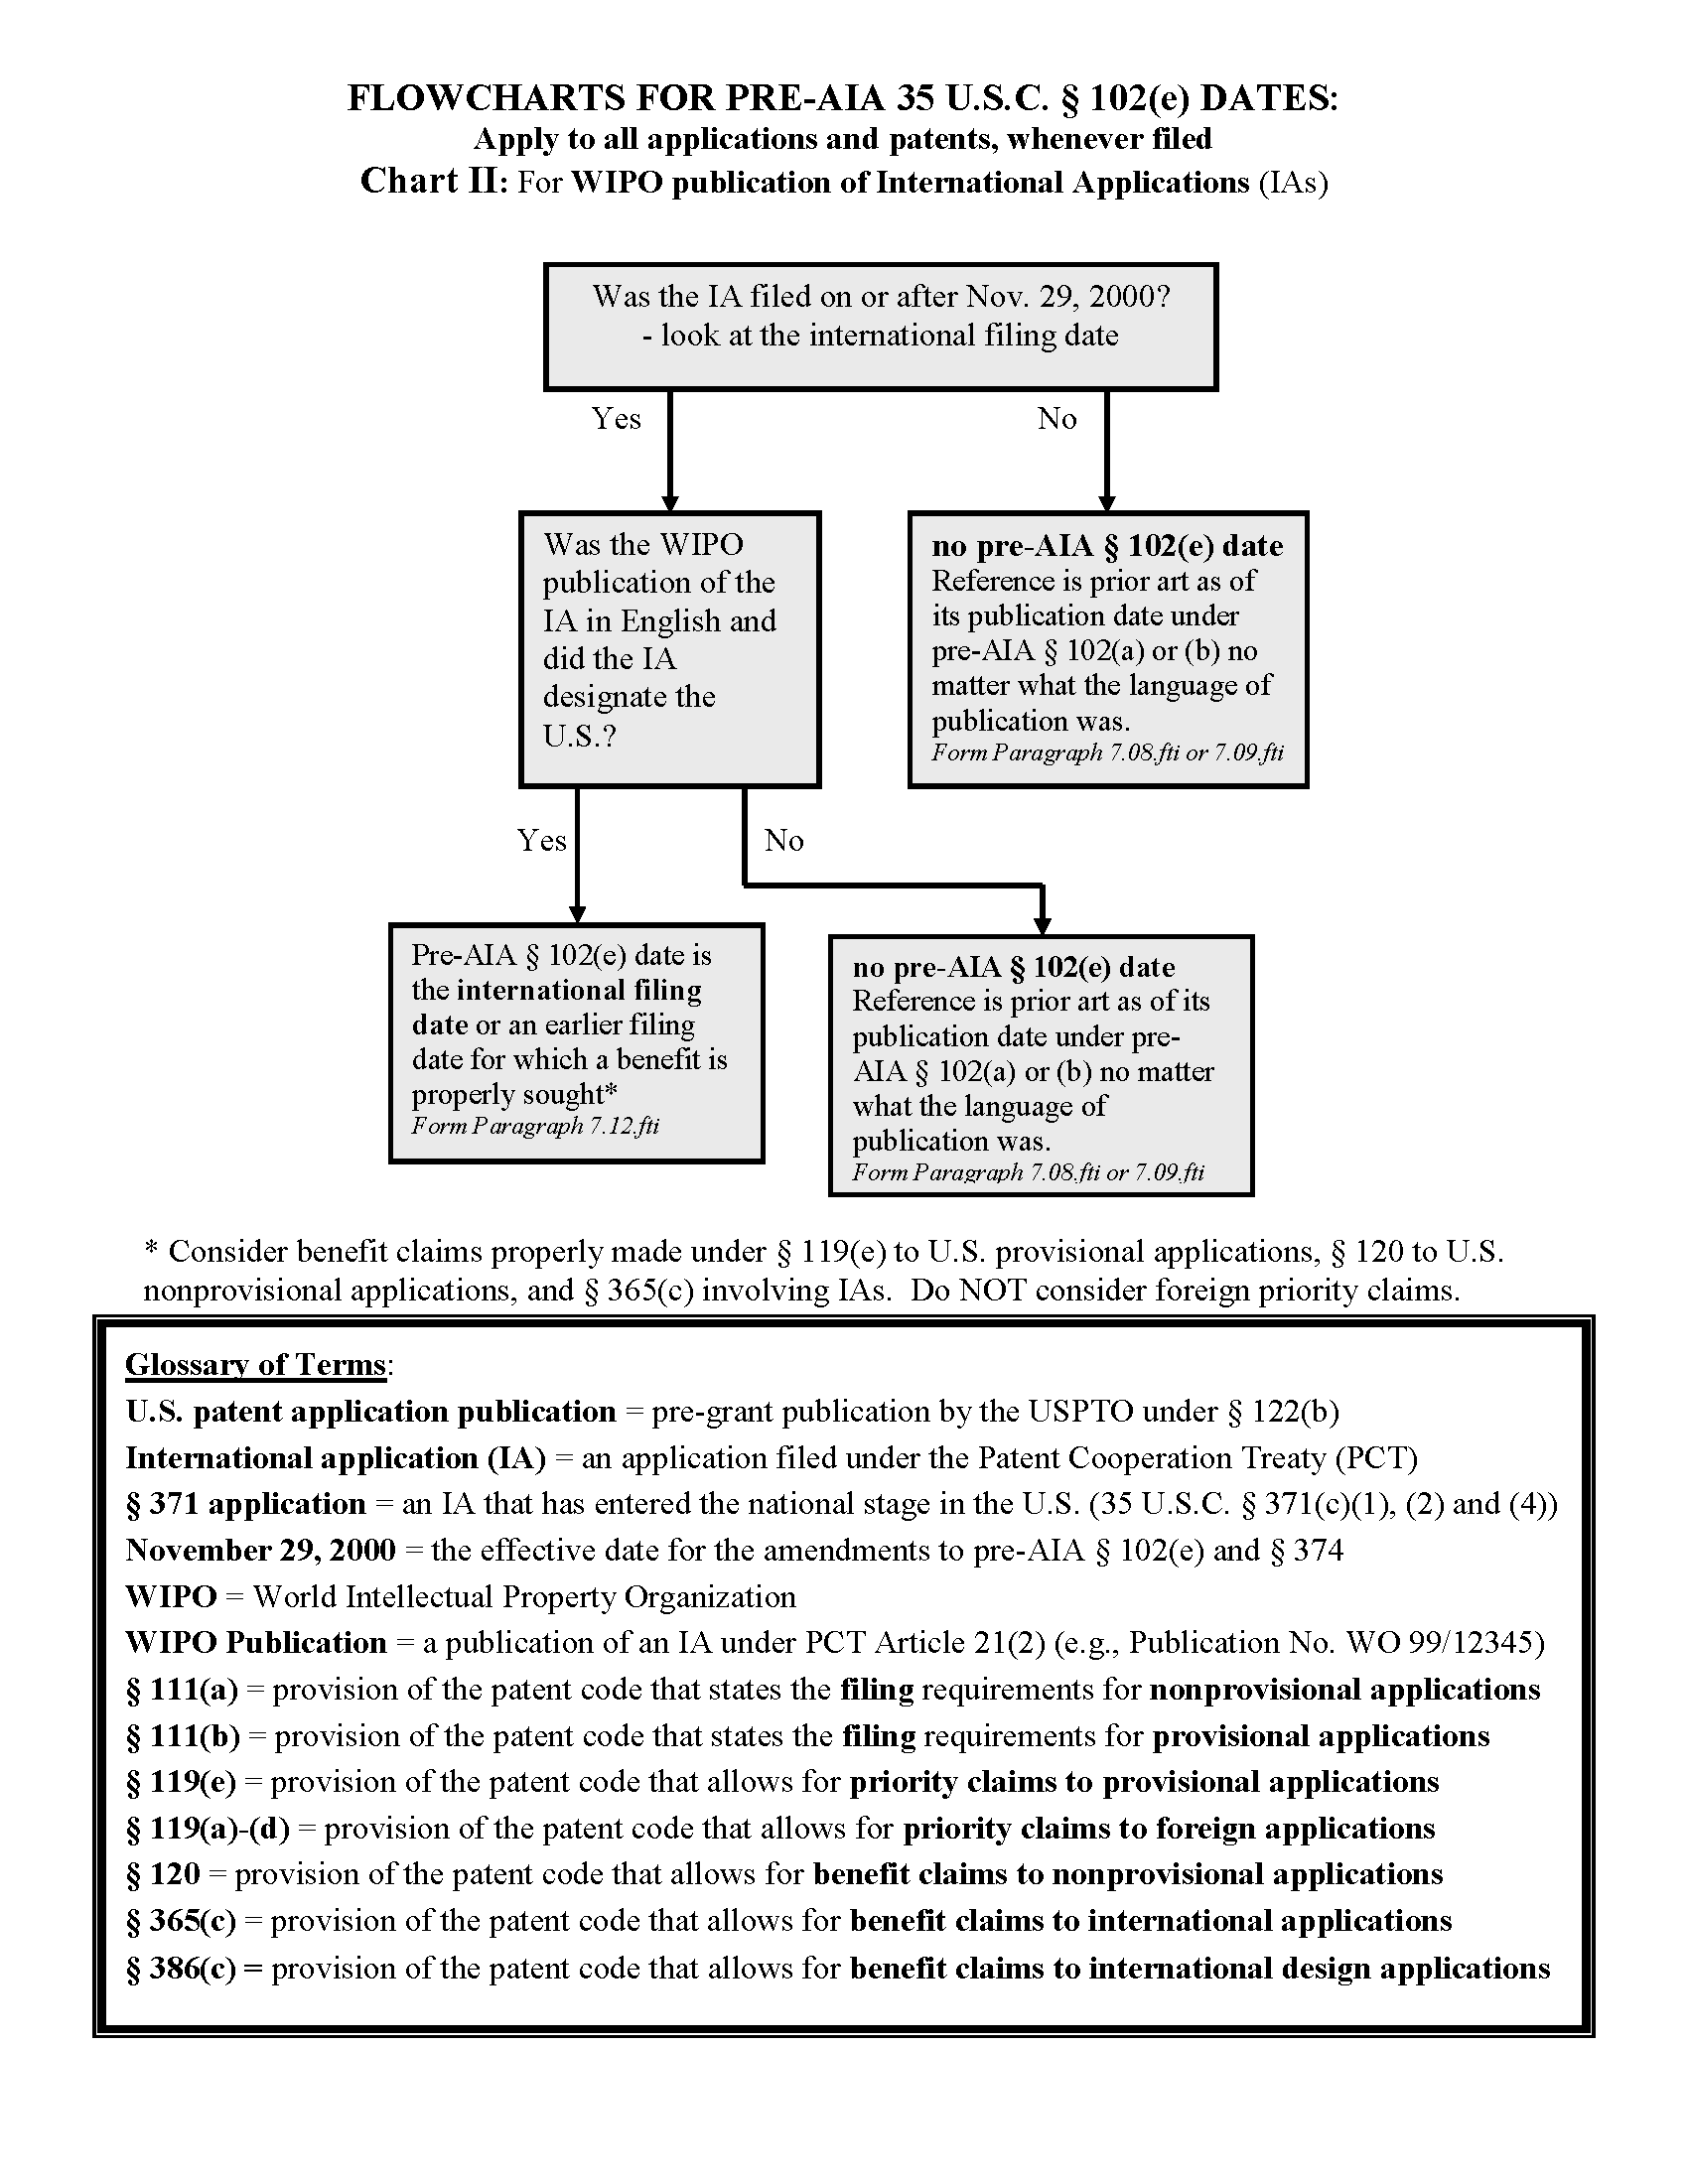 Flowchart for 35 U.S.C. 102(e) Dates. Chart II: For WIPO publication of International Applications (IAs)